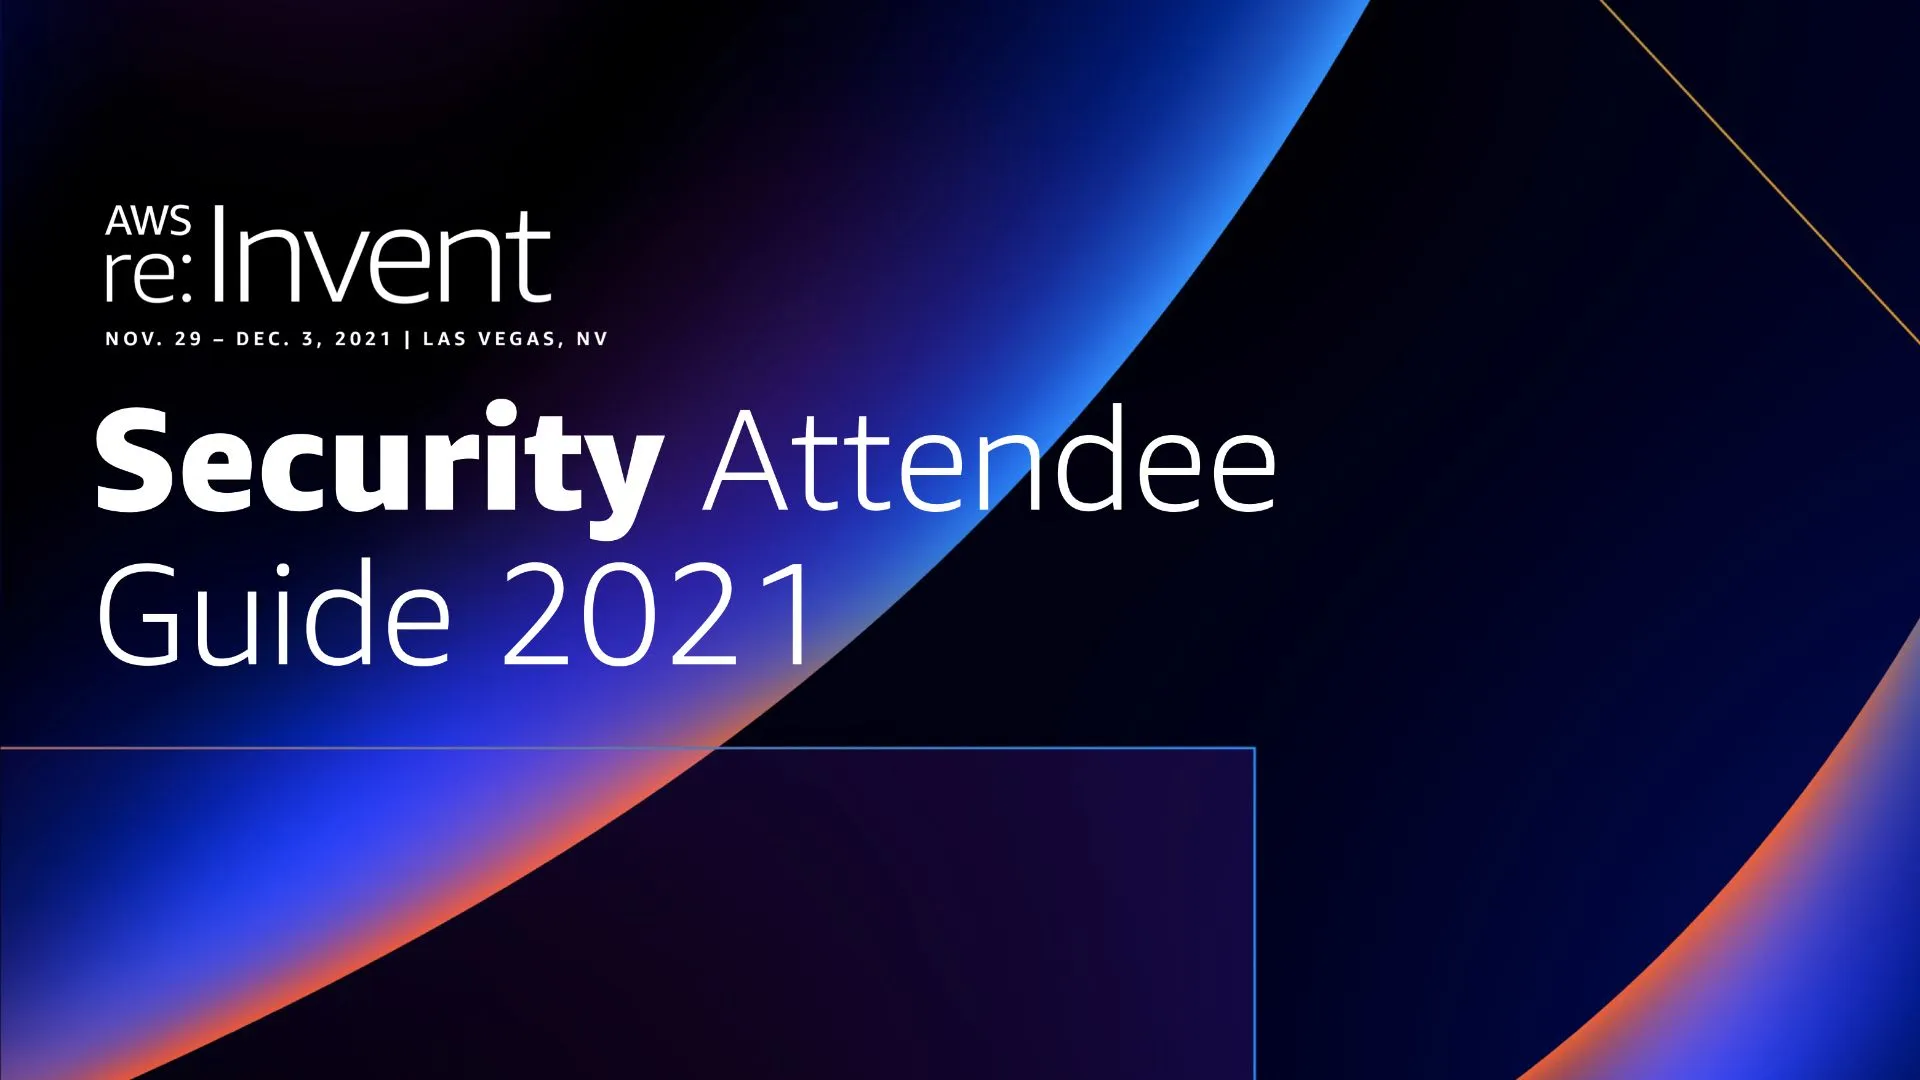 AWS re:Invent Security Attendee Guide 2021